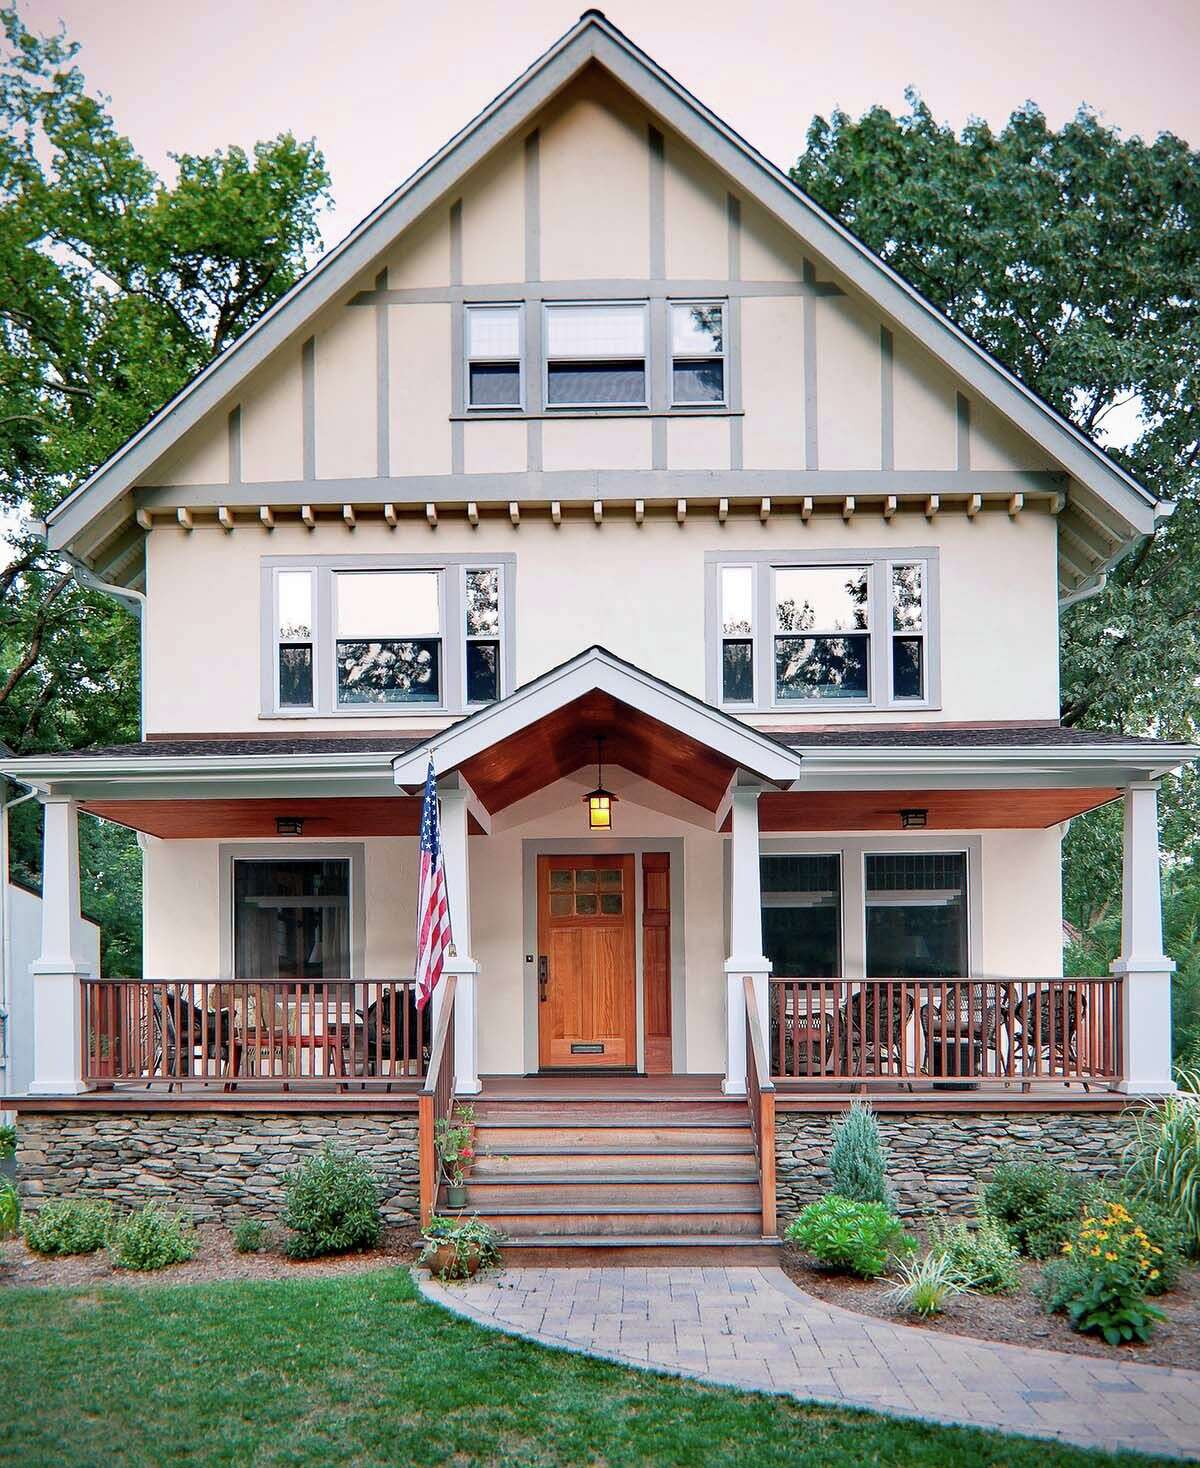 This historic, Craftsman-style Colonial house was transformed with characteristic details: gabled roof, tapered square columns, wide stairs, warm natural materials and textures like a stained wood ceiling and porch platform clad in natural stone.